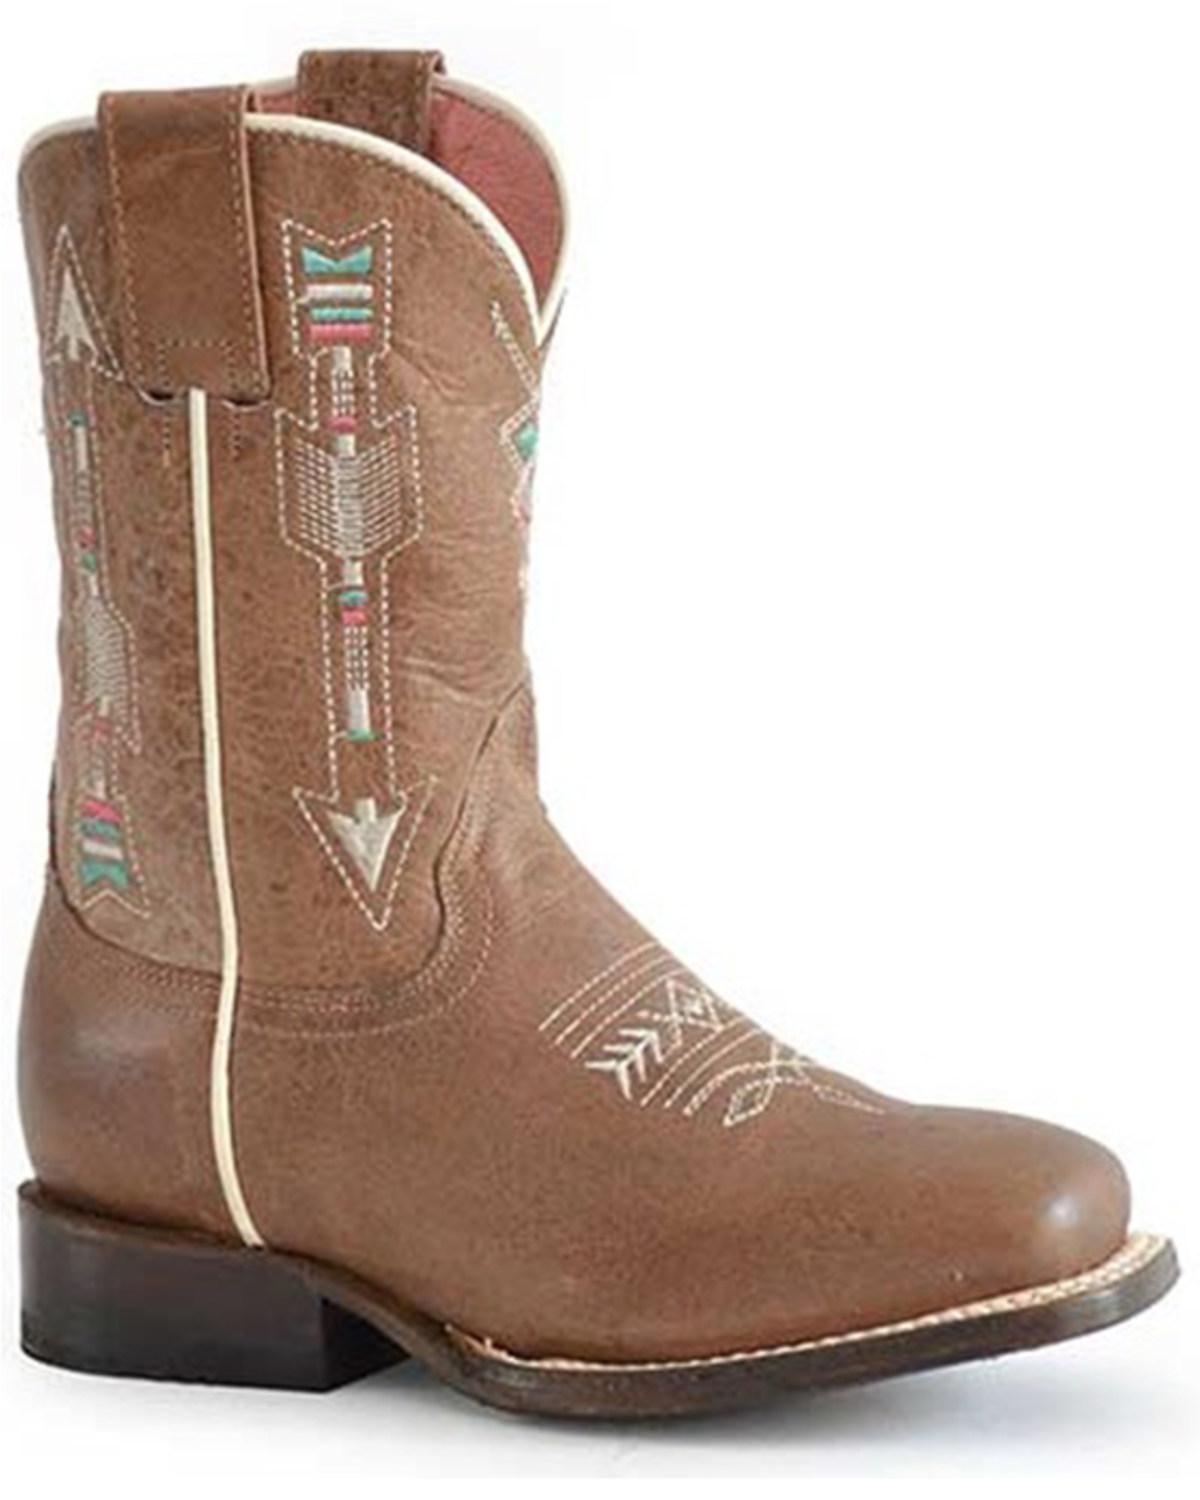 Roper Boys' Indian Arrows Western Boots - Square Toe